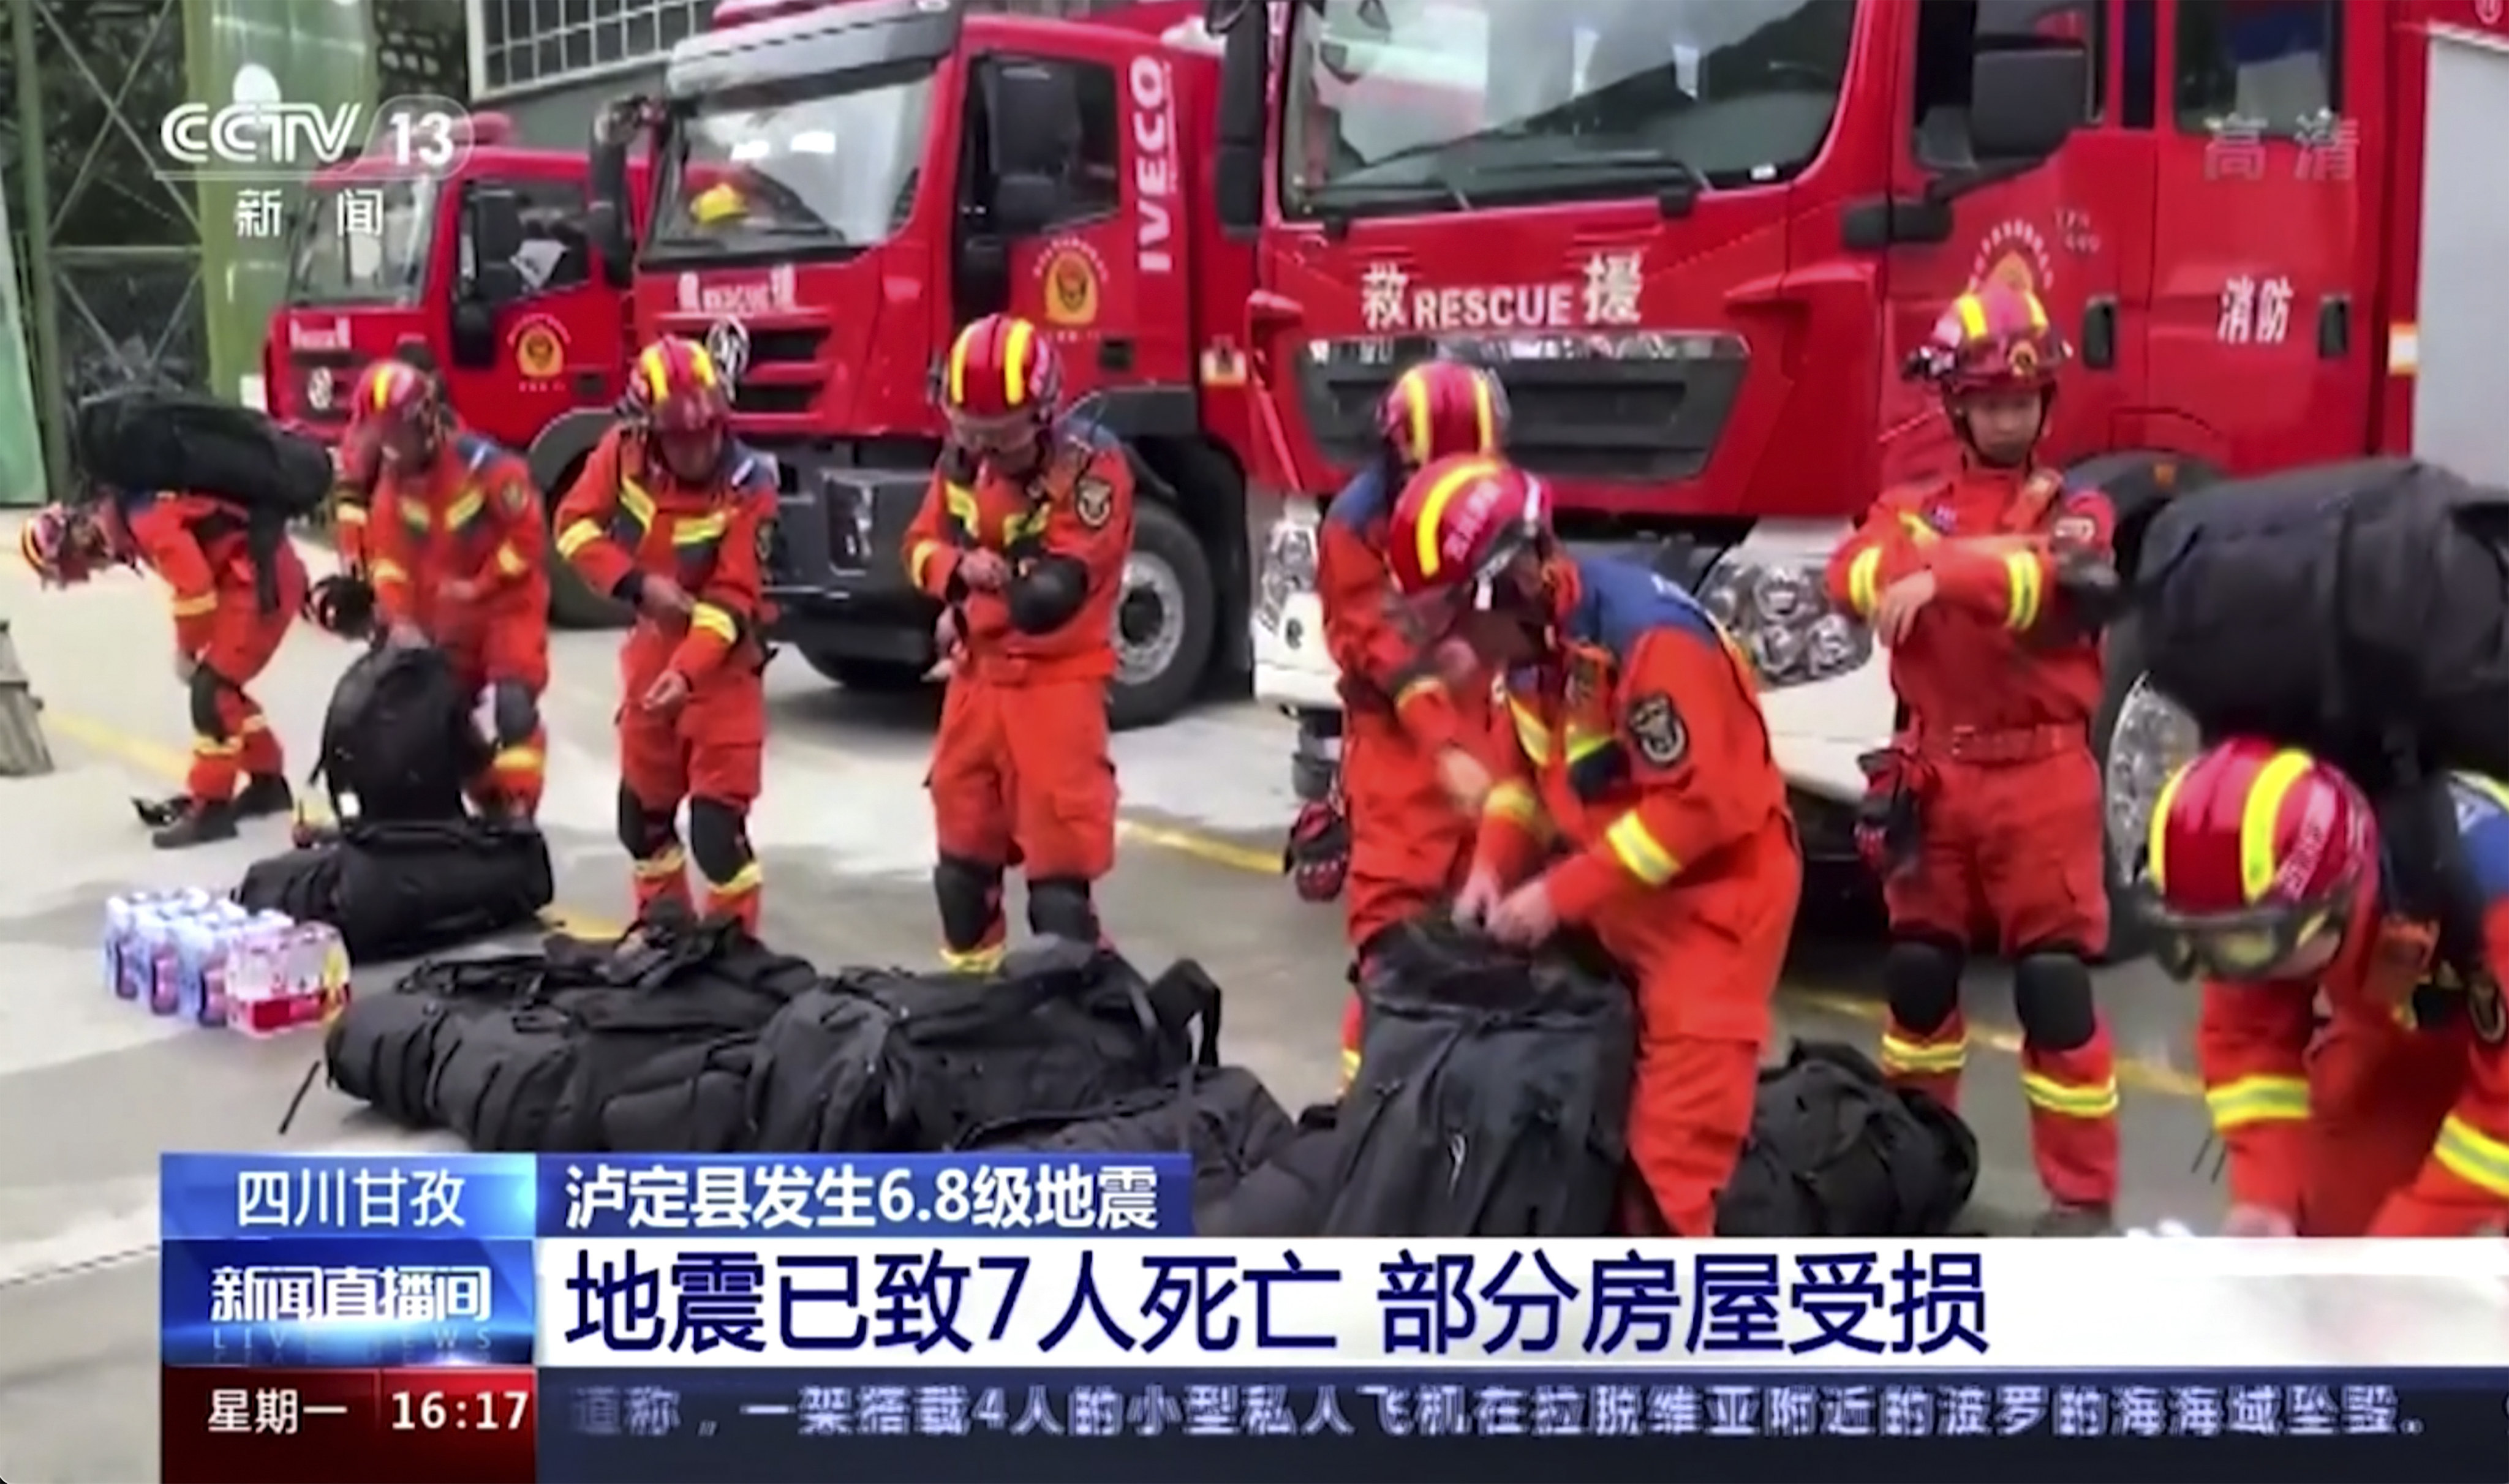 Firefighters get ready for rescue work in  Luding county of southwest China’s Sichuan province. Photo: CCTV via AP 